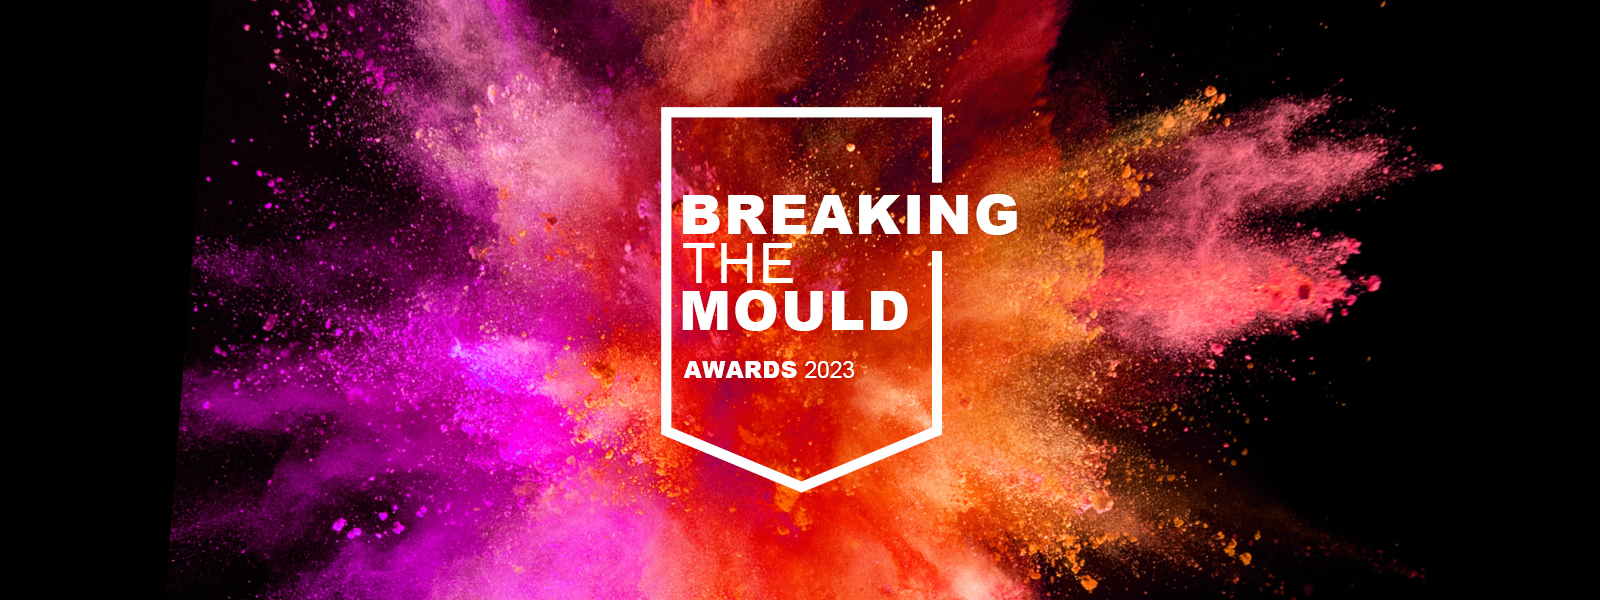 Breaking the Mould 2023 